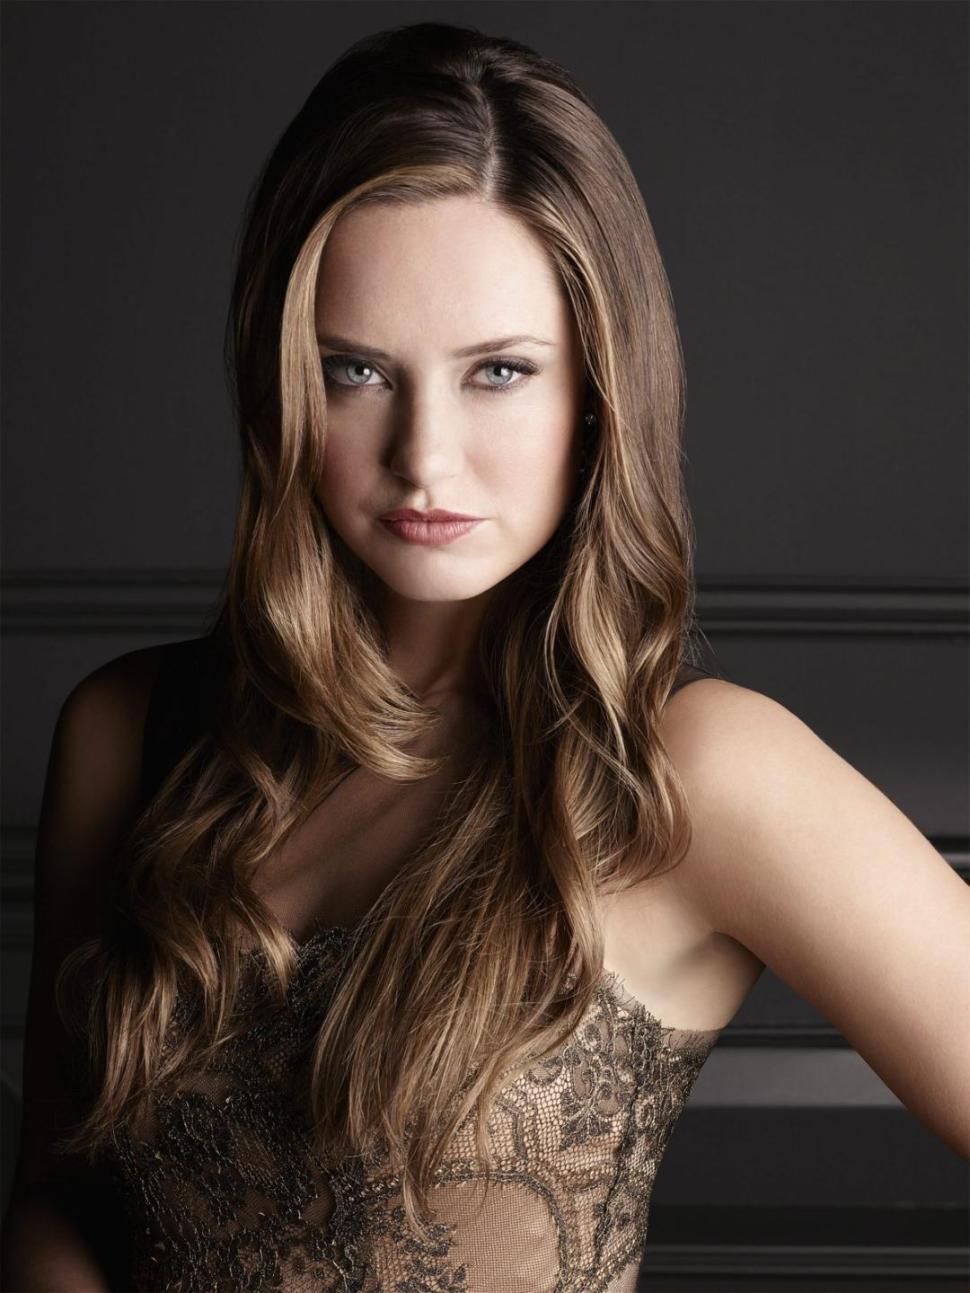 Ophelia played by Merritt Patterson who made an appearance in the Pretty Li...